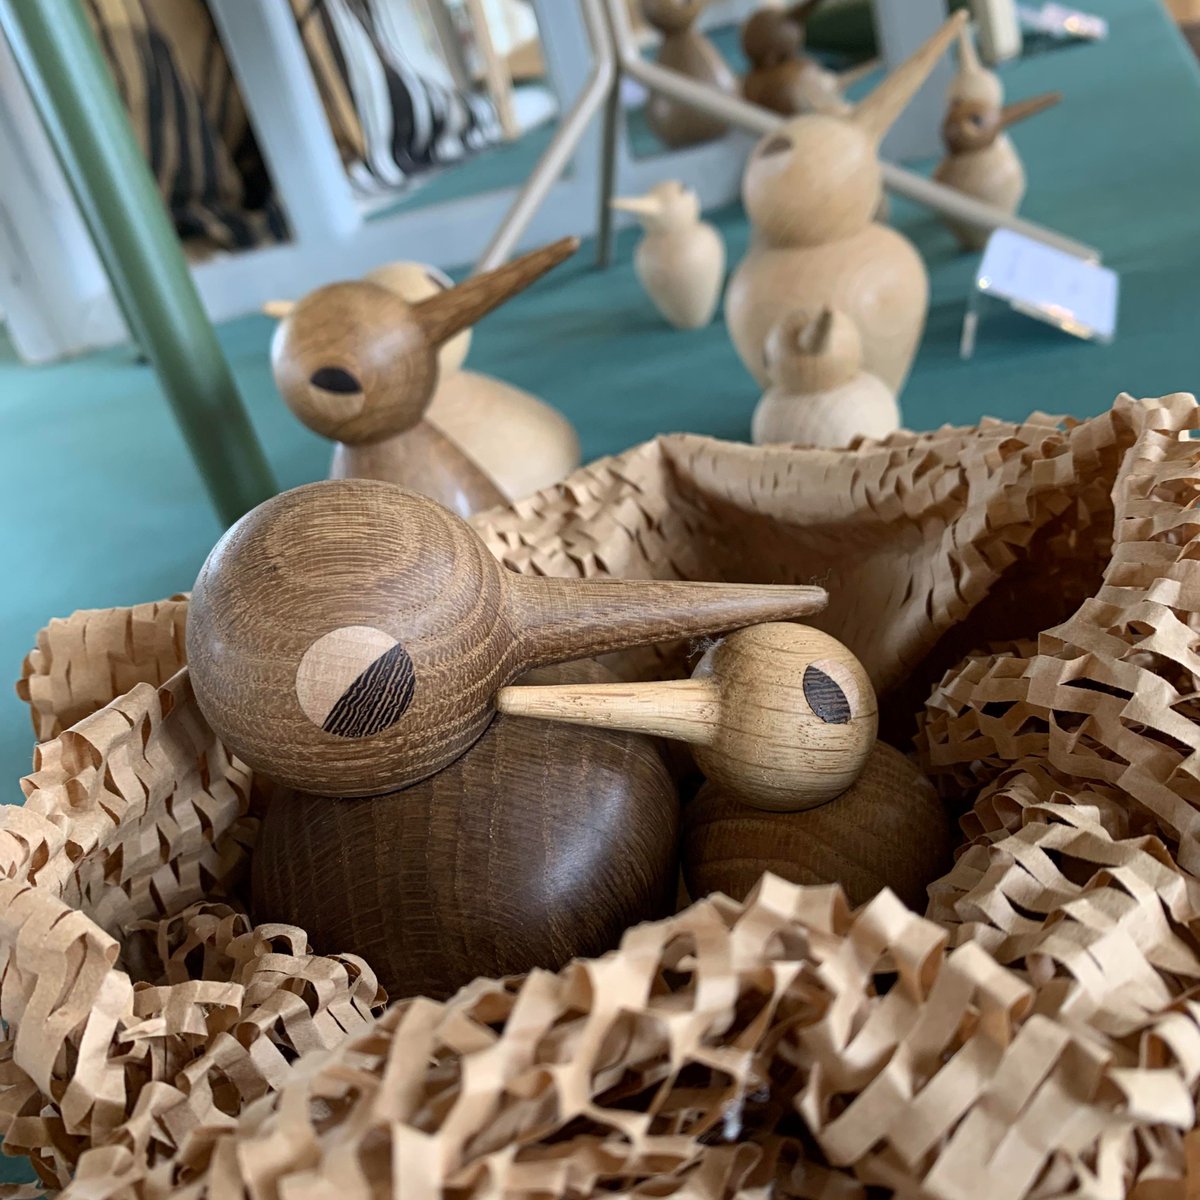 These little birds by were designed by Kristian Vedel in 1959. Beautifully produced by @ArchitectMade  in oak, wenge and maple wood, they've taken over a whole table in The Home... & they've made friends with the Eames elephant! Available from The Home or saltsmillshop.co.uk